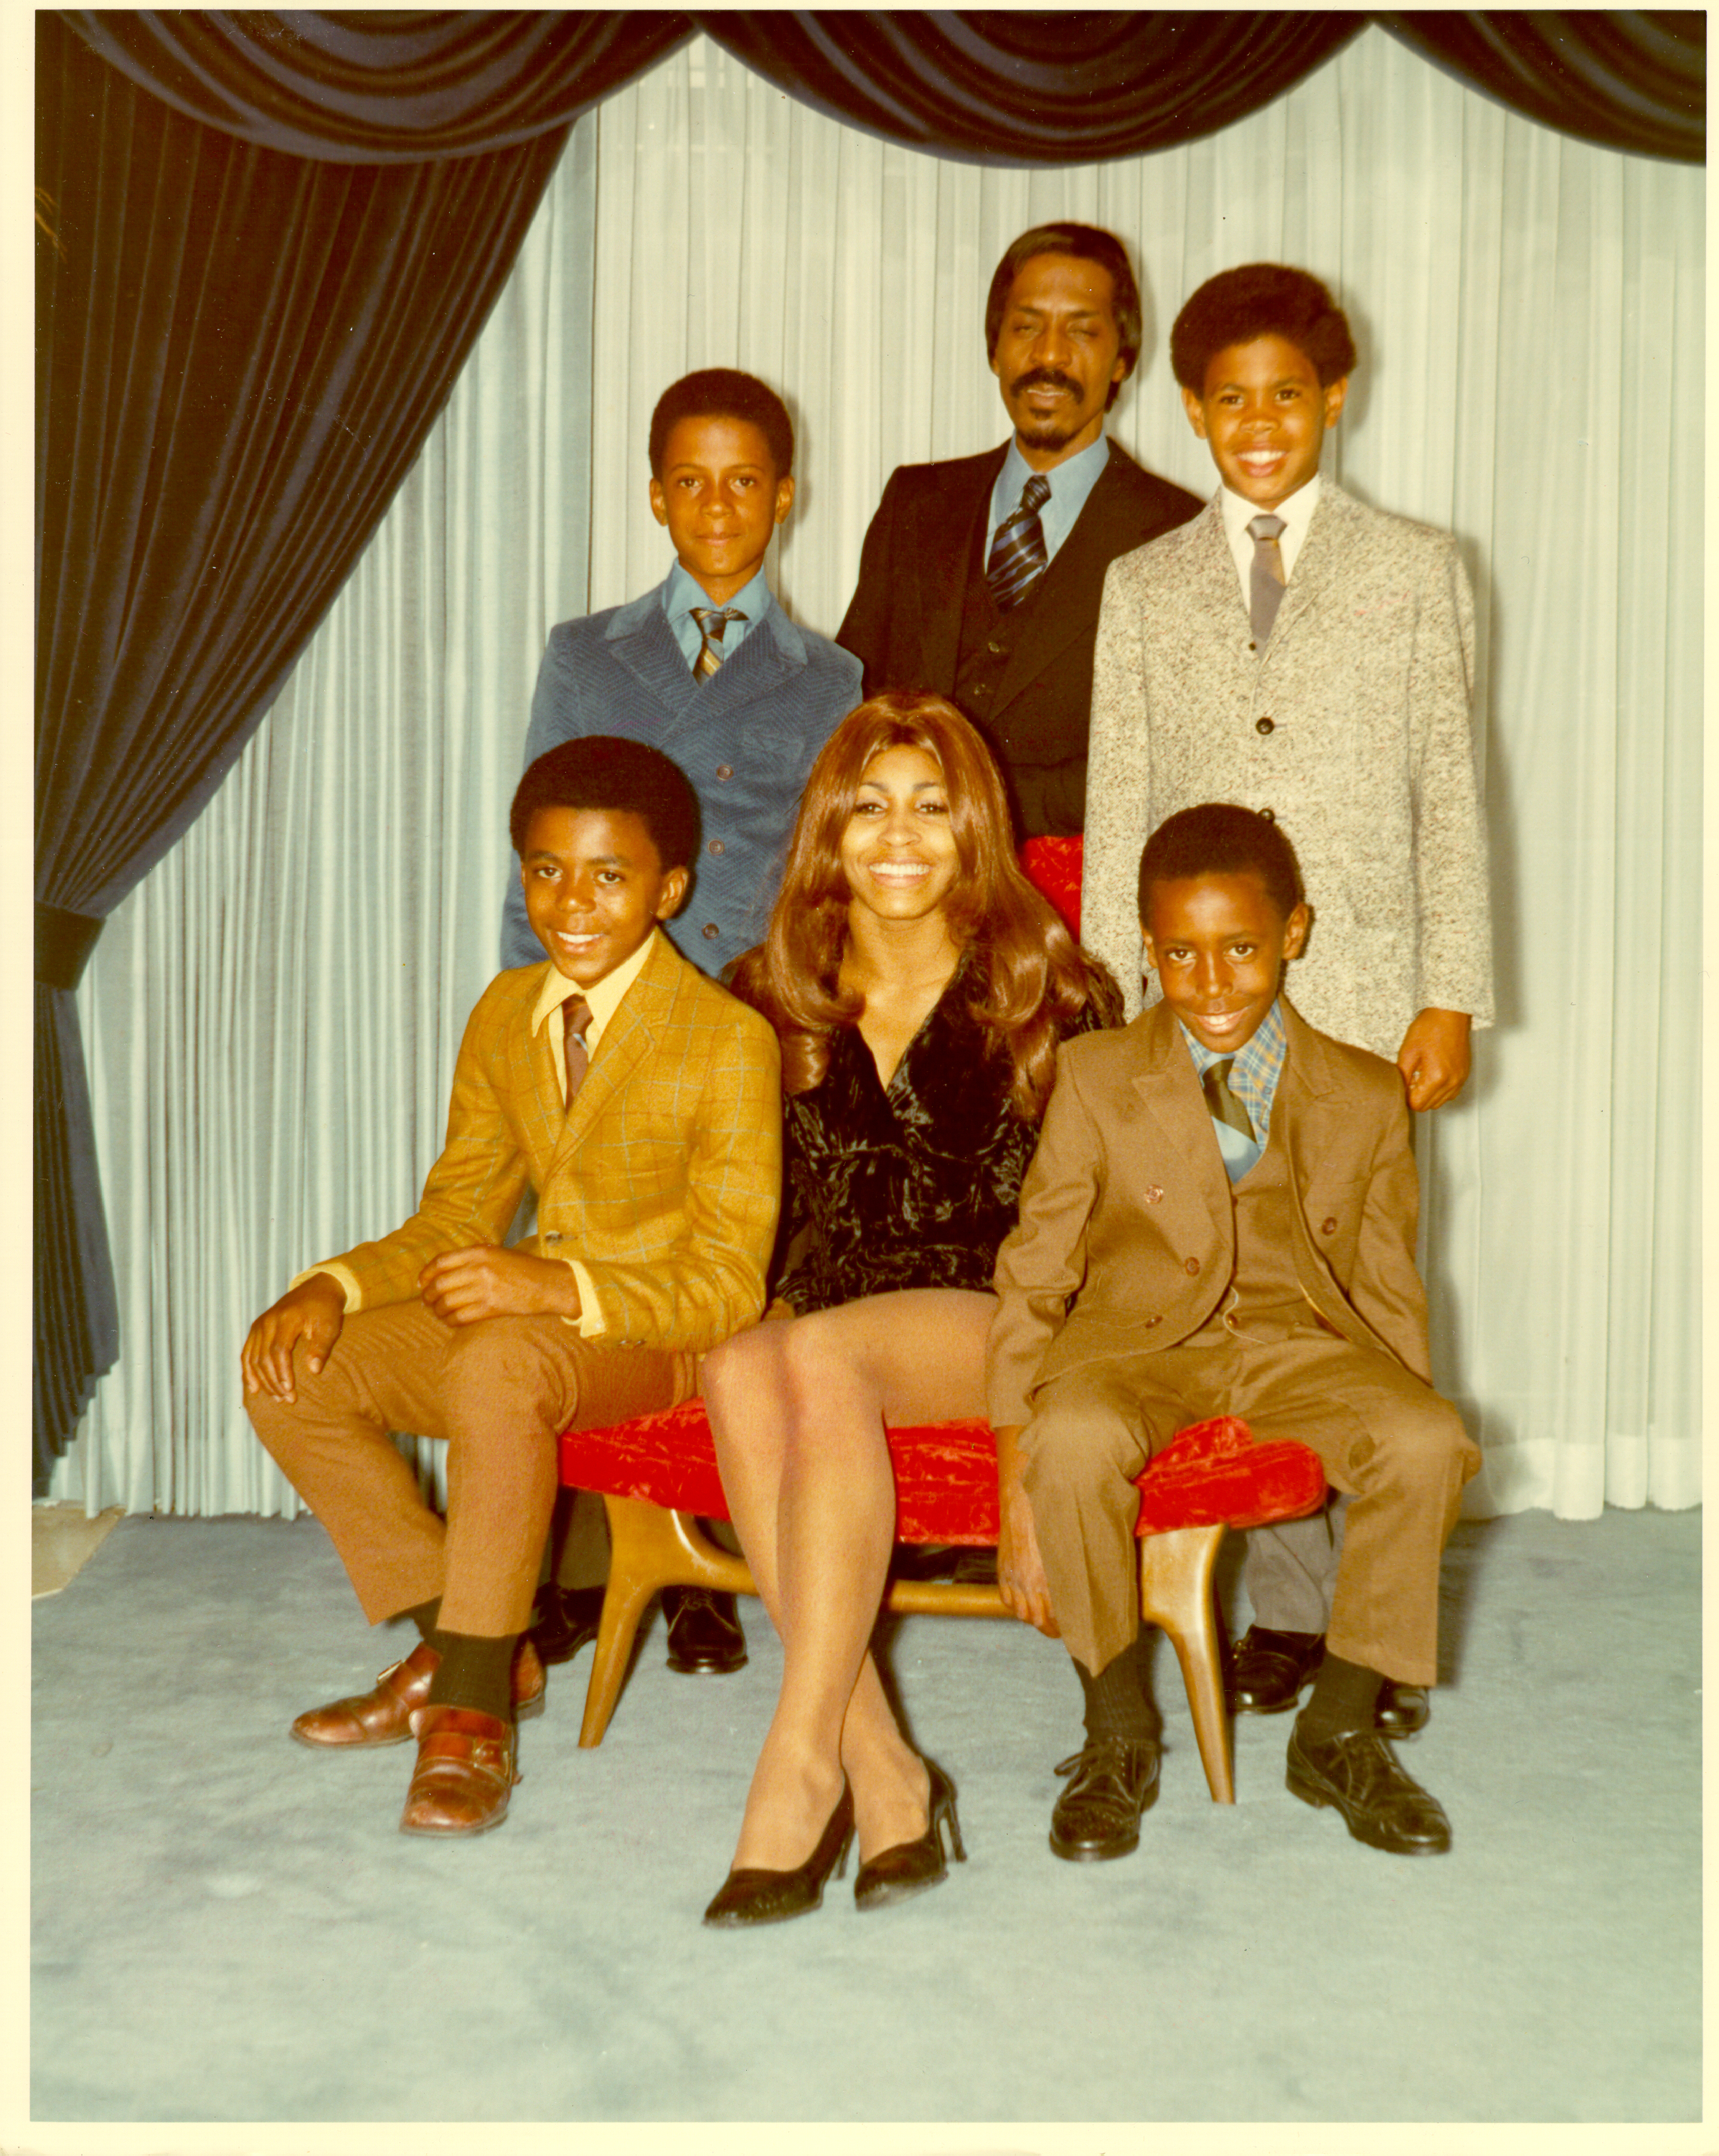 Tina Turner with Ike Turner and their children | Source: Getty Images